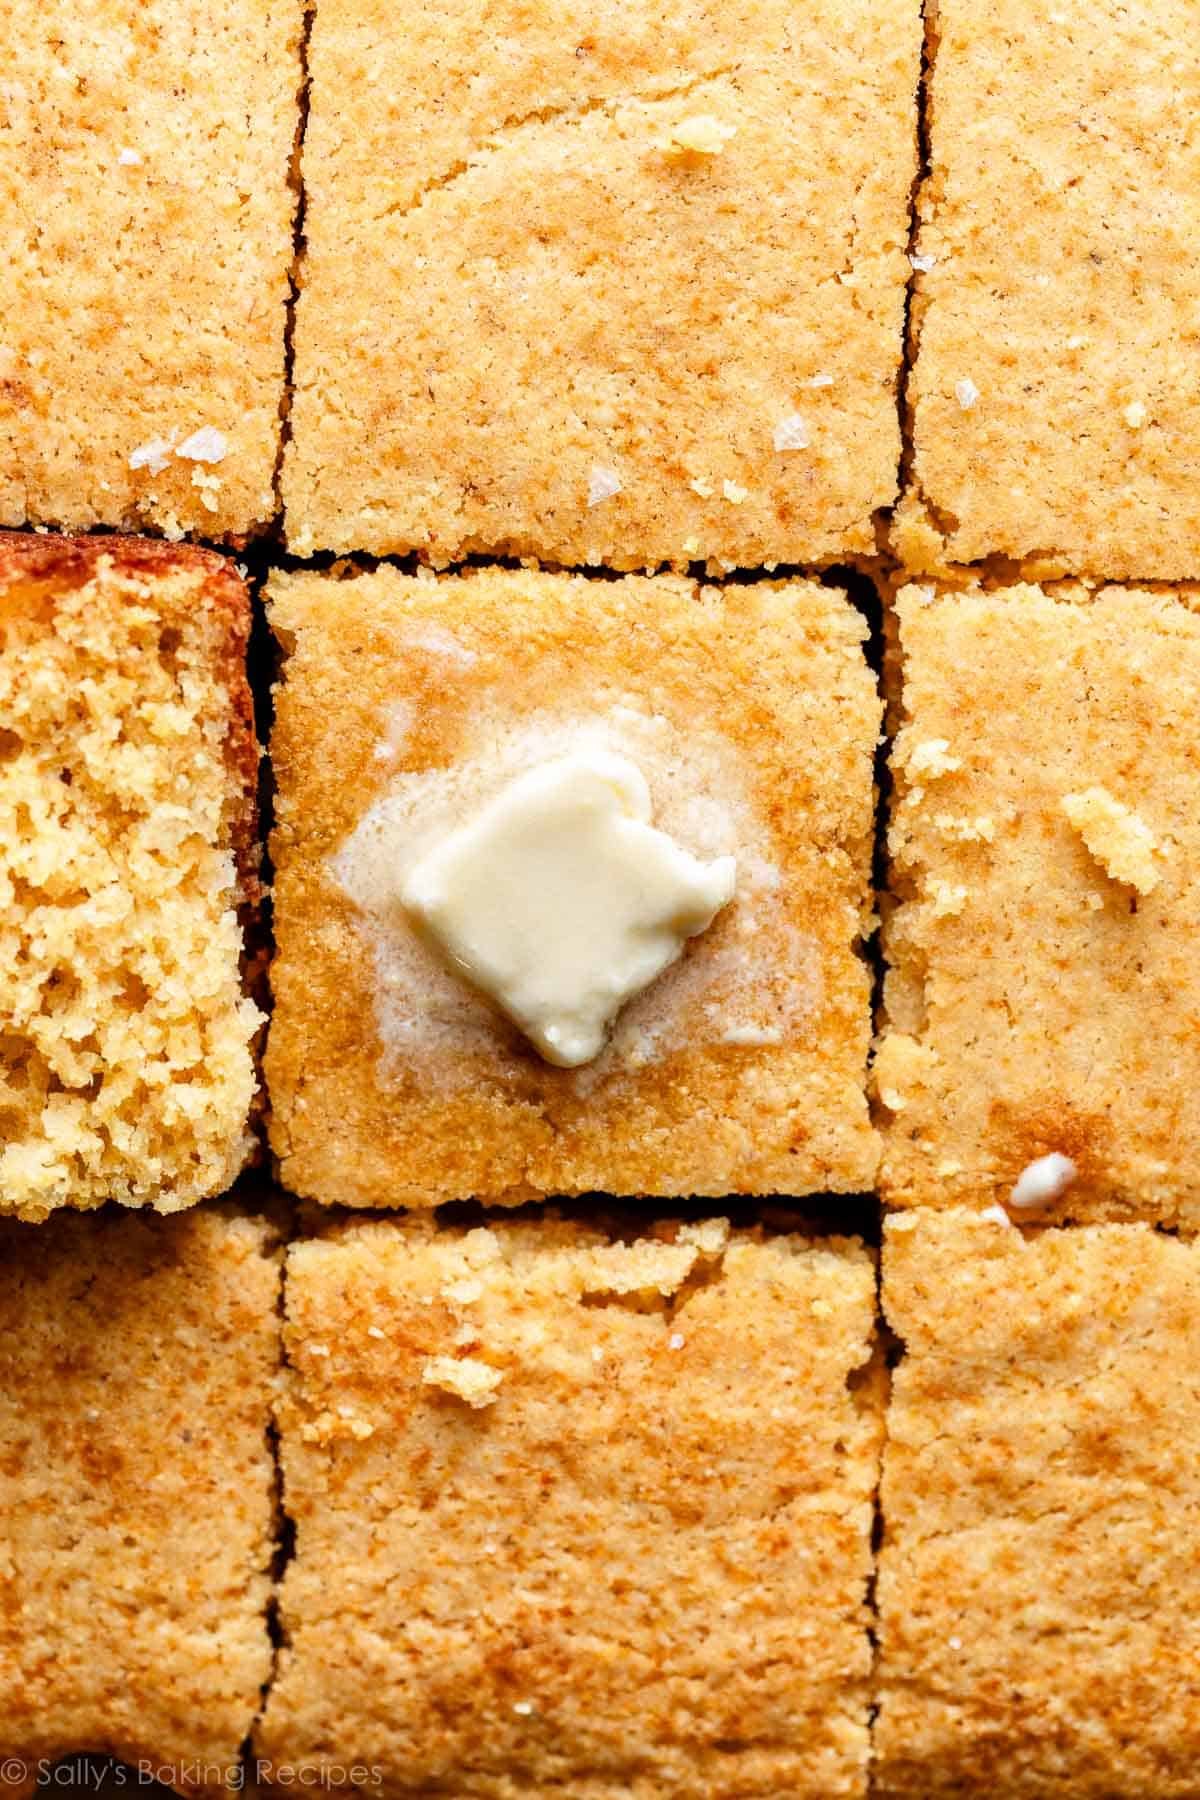 cornbread squares with butter melting on top of square in the center.